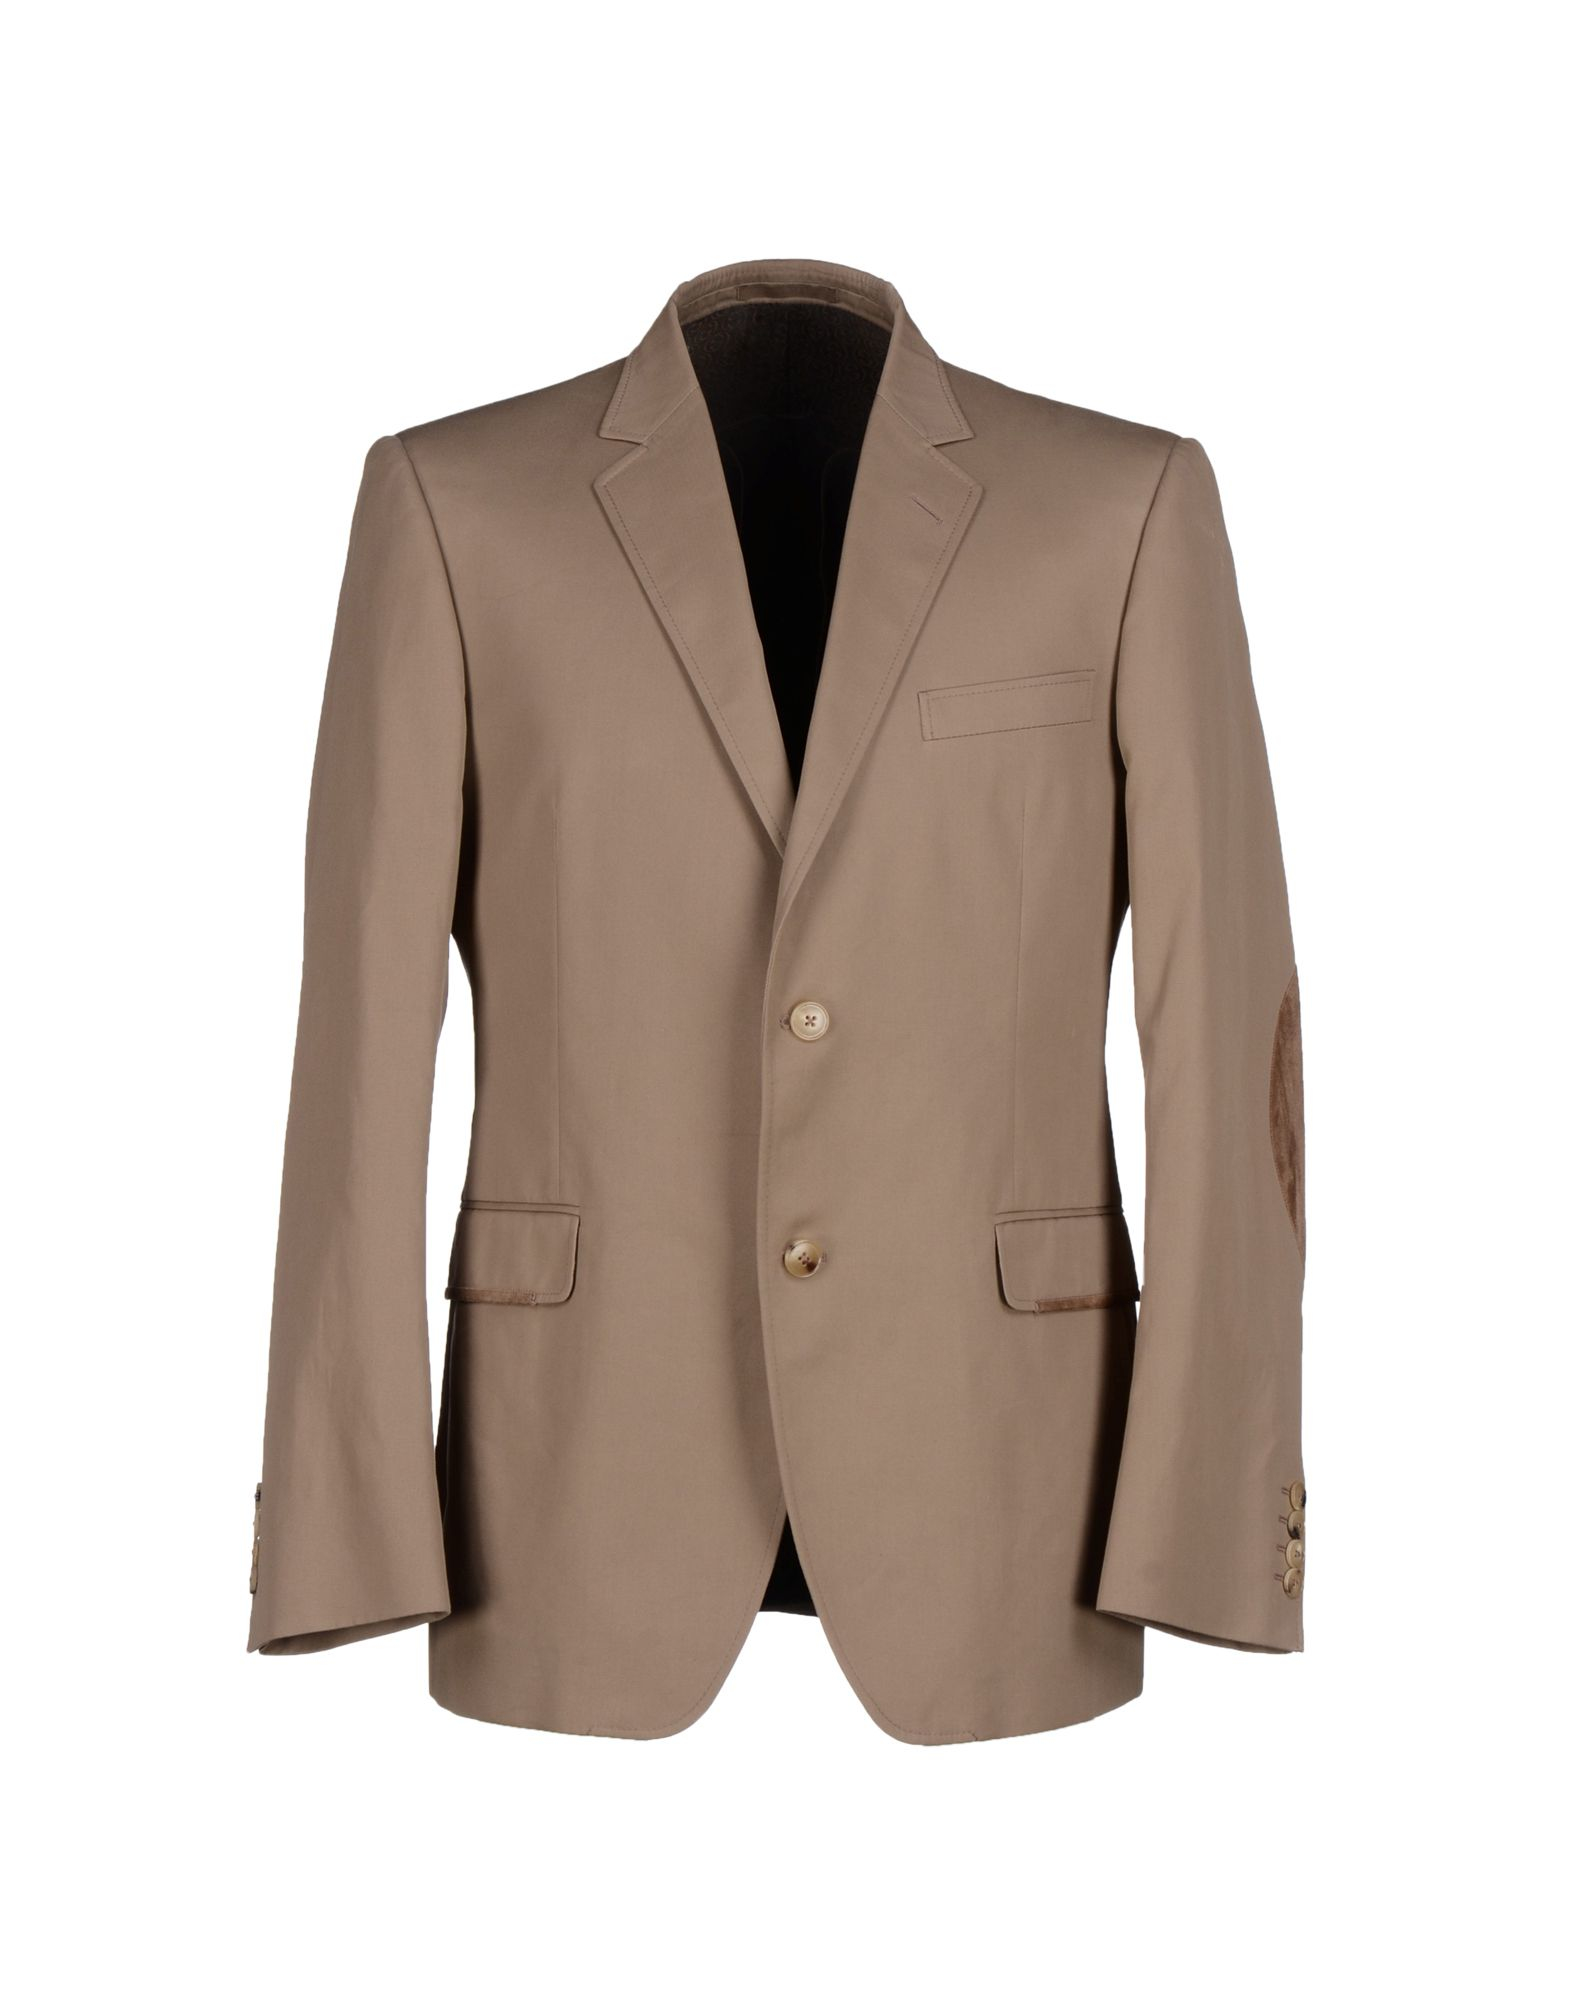 Lyst Gucci  Blazer  in Natural for Men